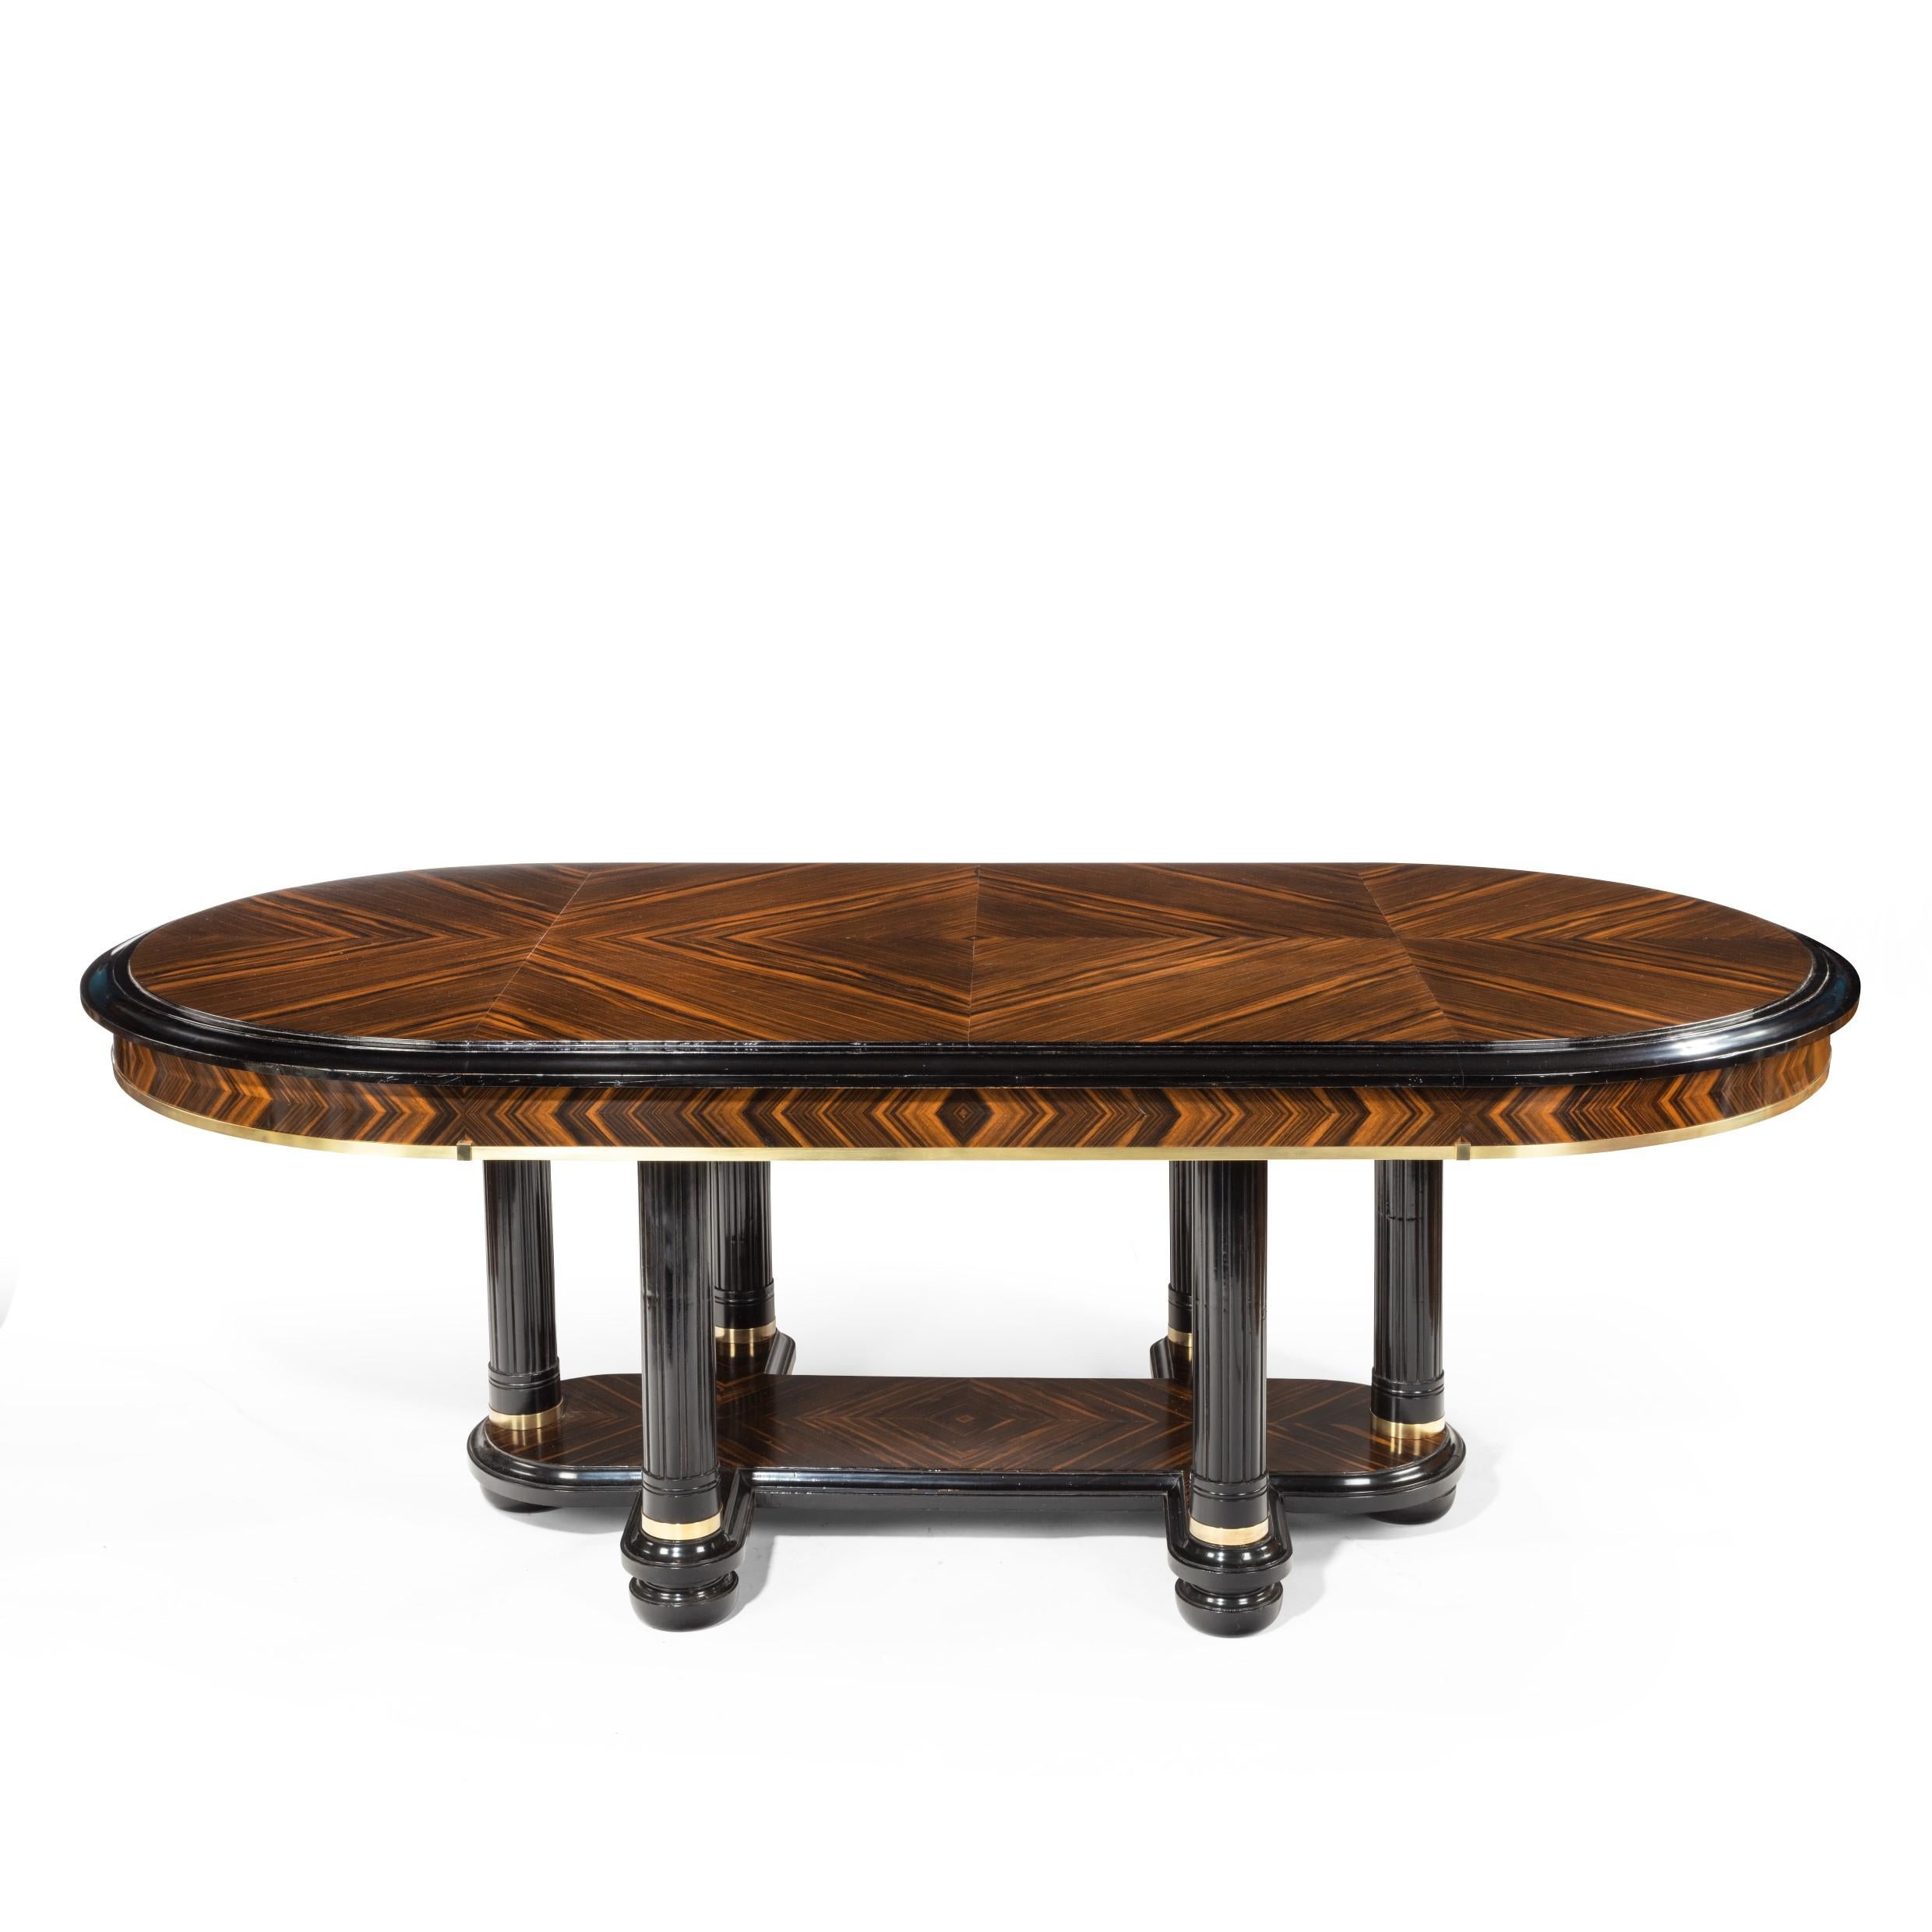 Early 20th Century Stylish Art Deco Zebra Wood Centre or Dining Table